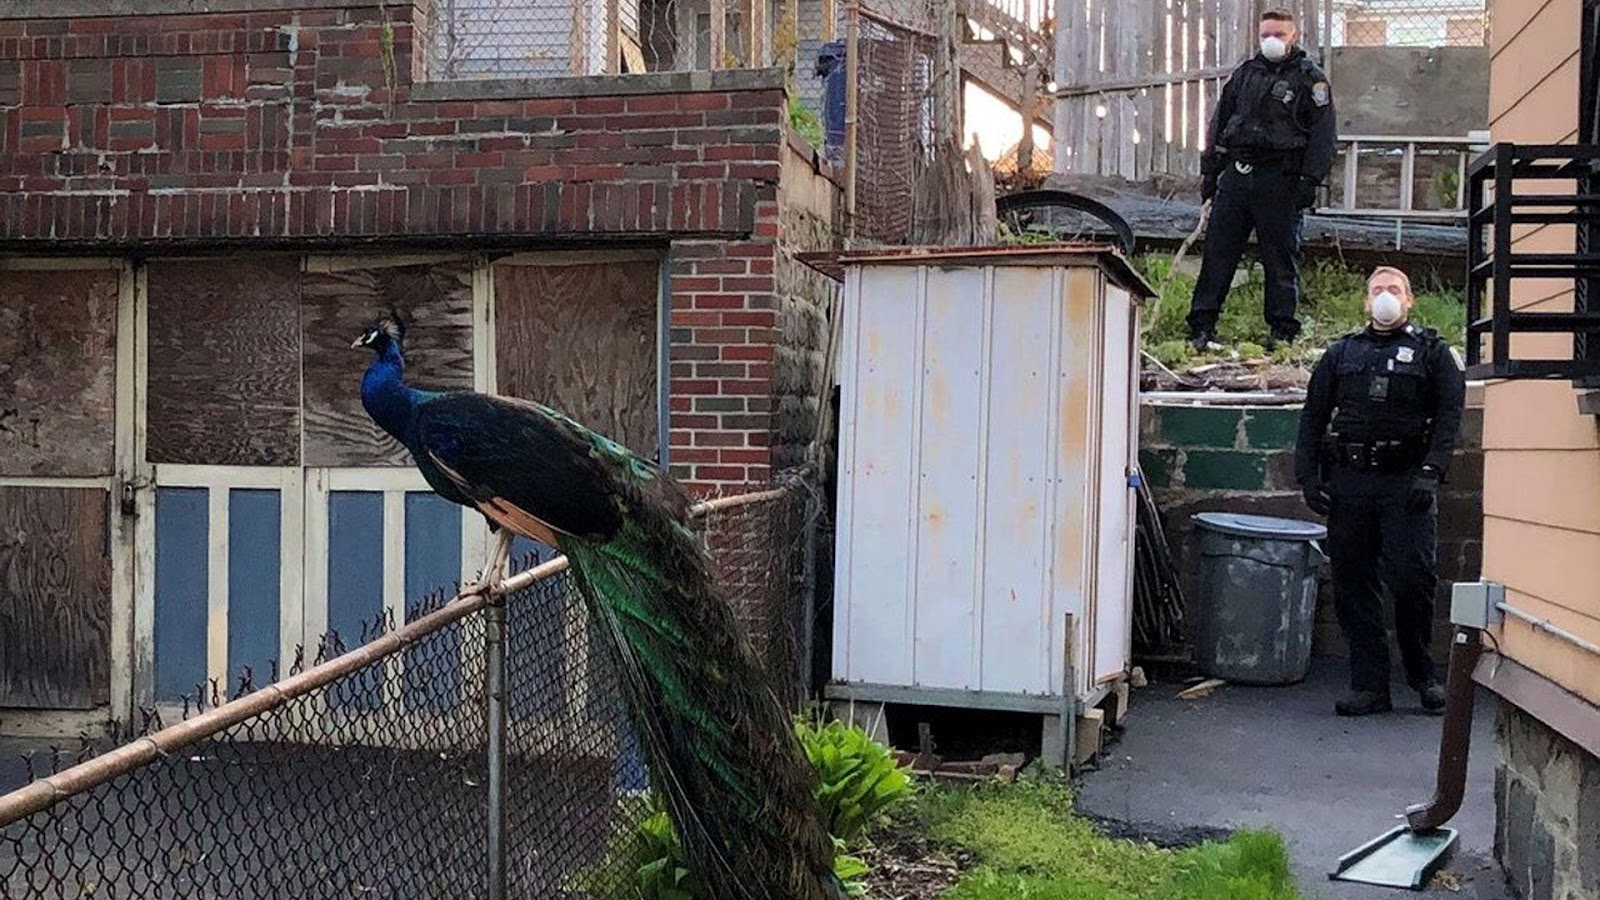 A bird standing in front of a building
Description automatically generated